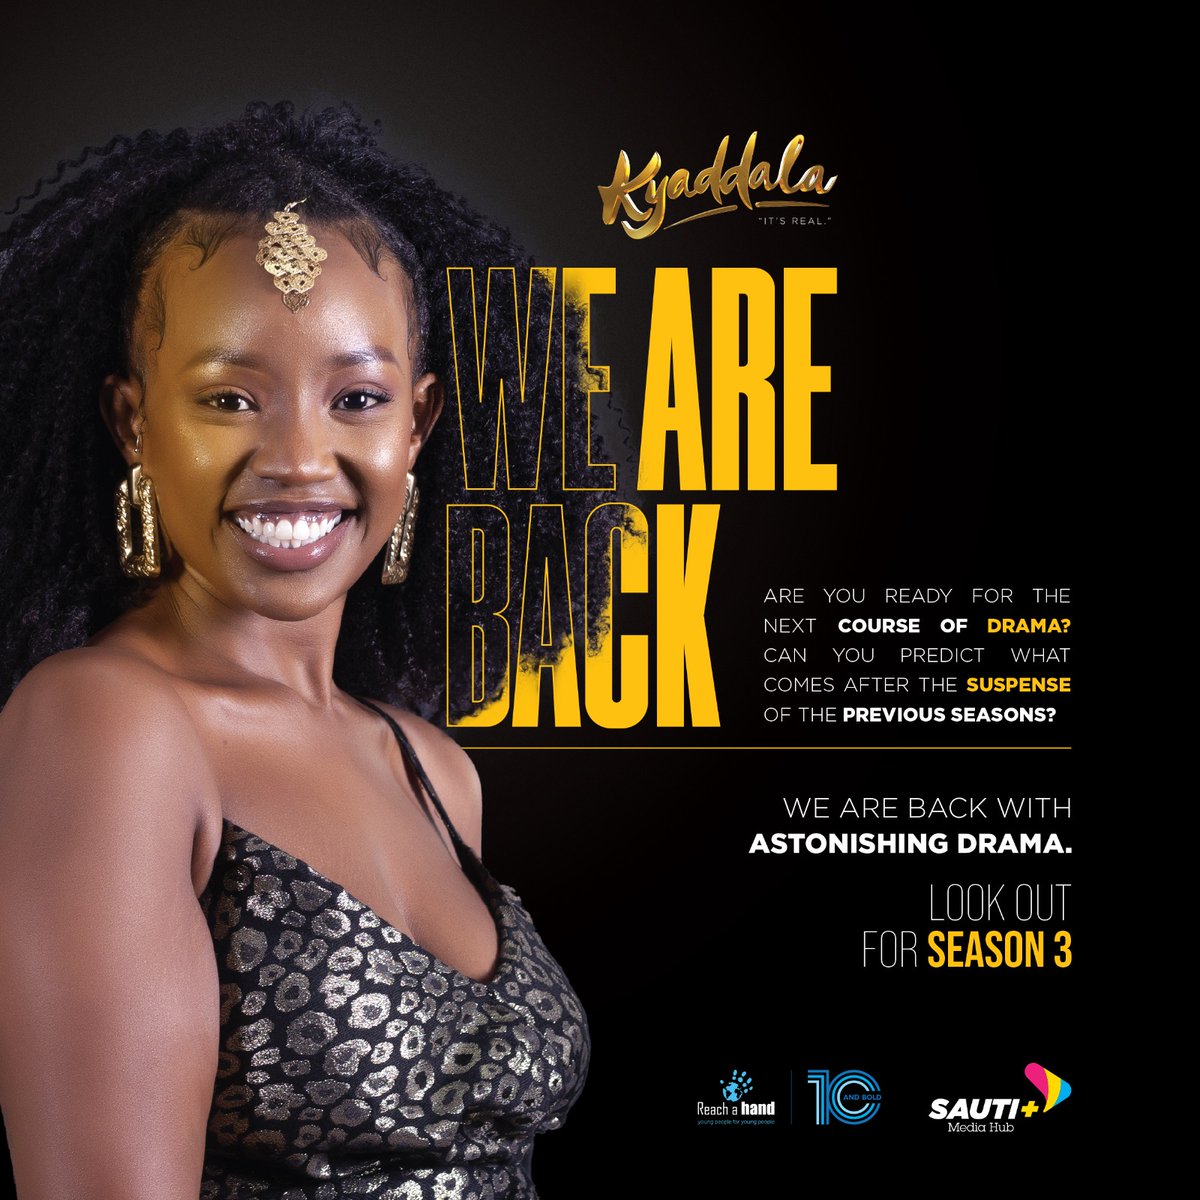 Kyaddala is a story that relates to the experiences of countless youths in our communities. This tale brings a mirror to your life and allows you to visualize yourself on the big screen as a young person.
@reachahand
@kyaddalaitsreal
@eddykenzoficial 
@Anitahfabiola